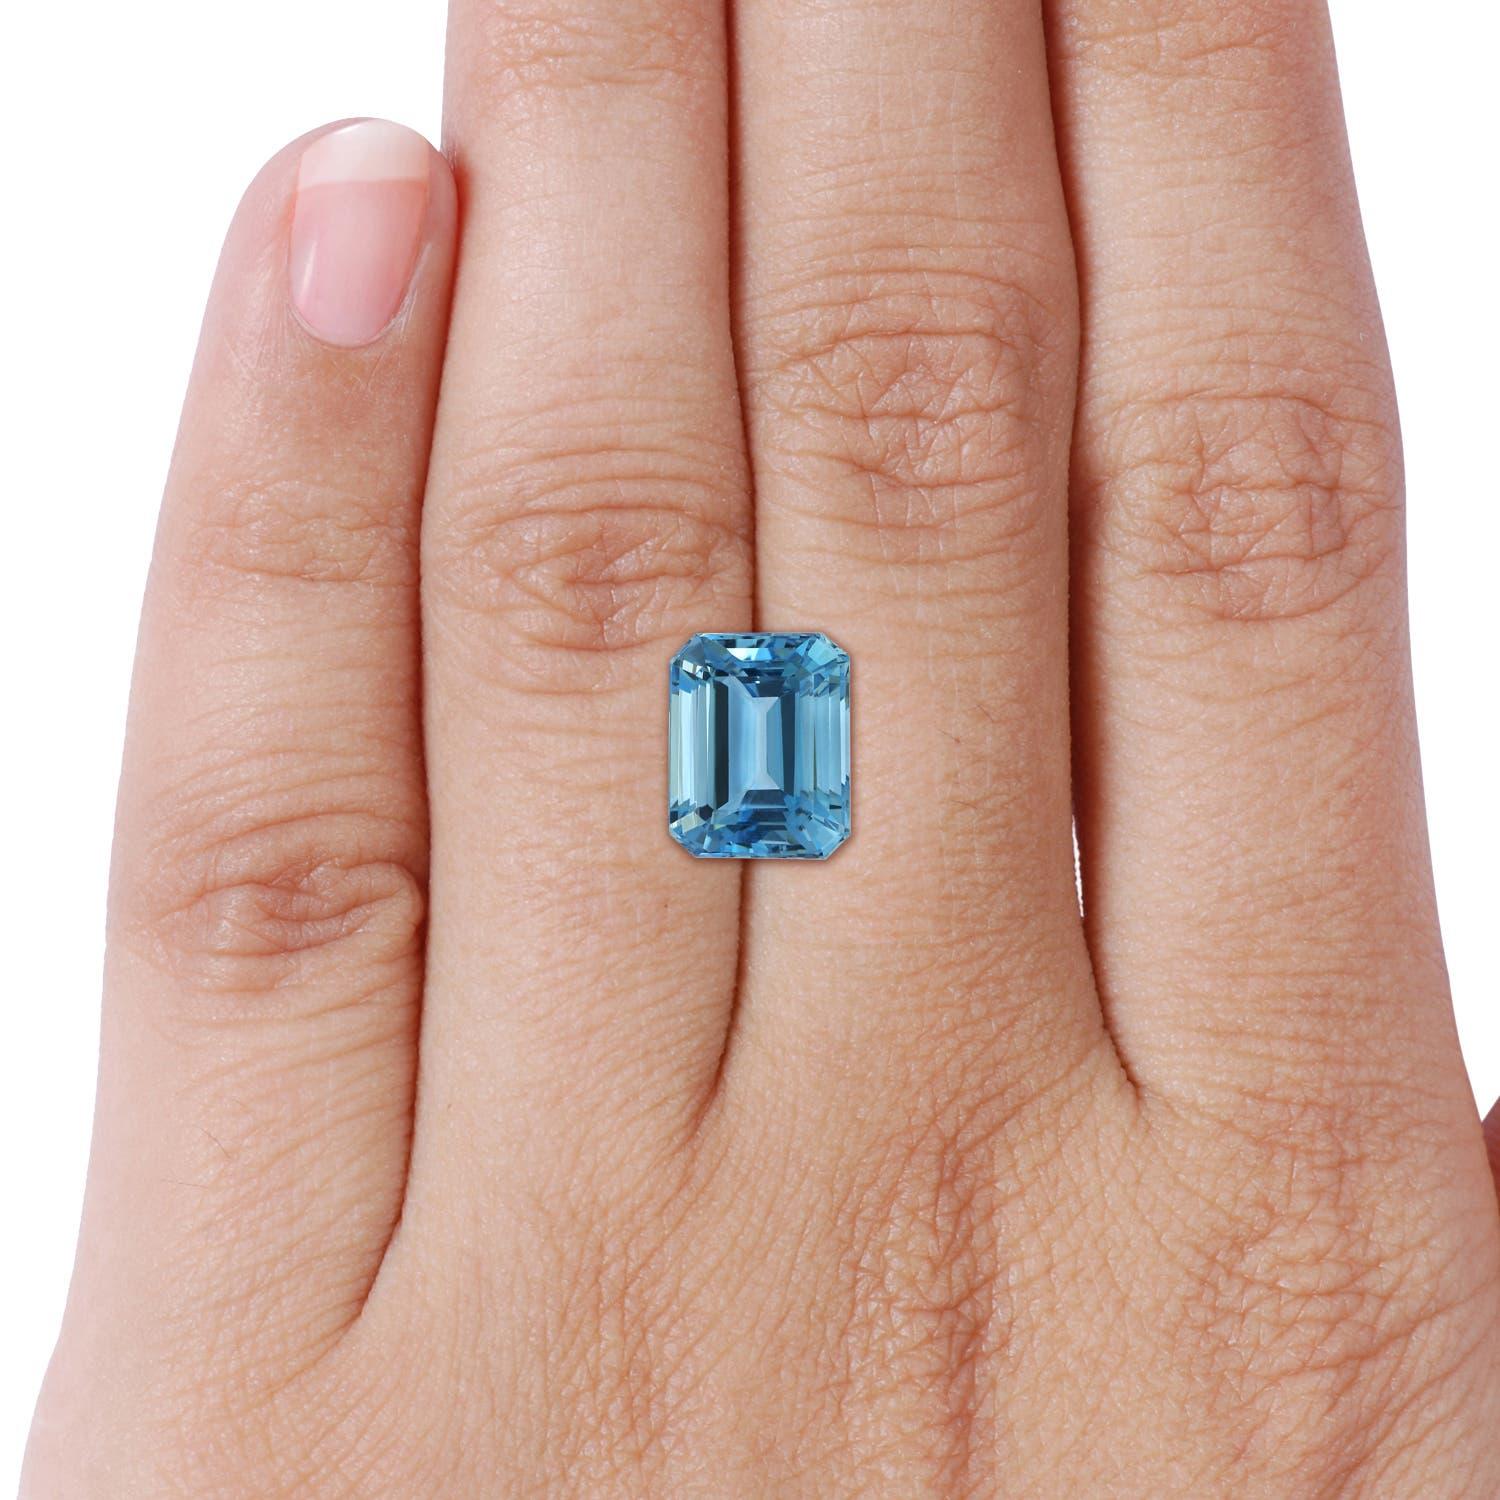 For Sale:  ANGARA GIA Certified 5.04ct Aquamarine Ring in 18K White Gold with Diamond 6